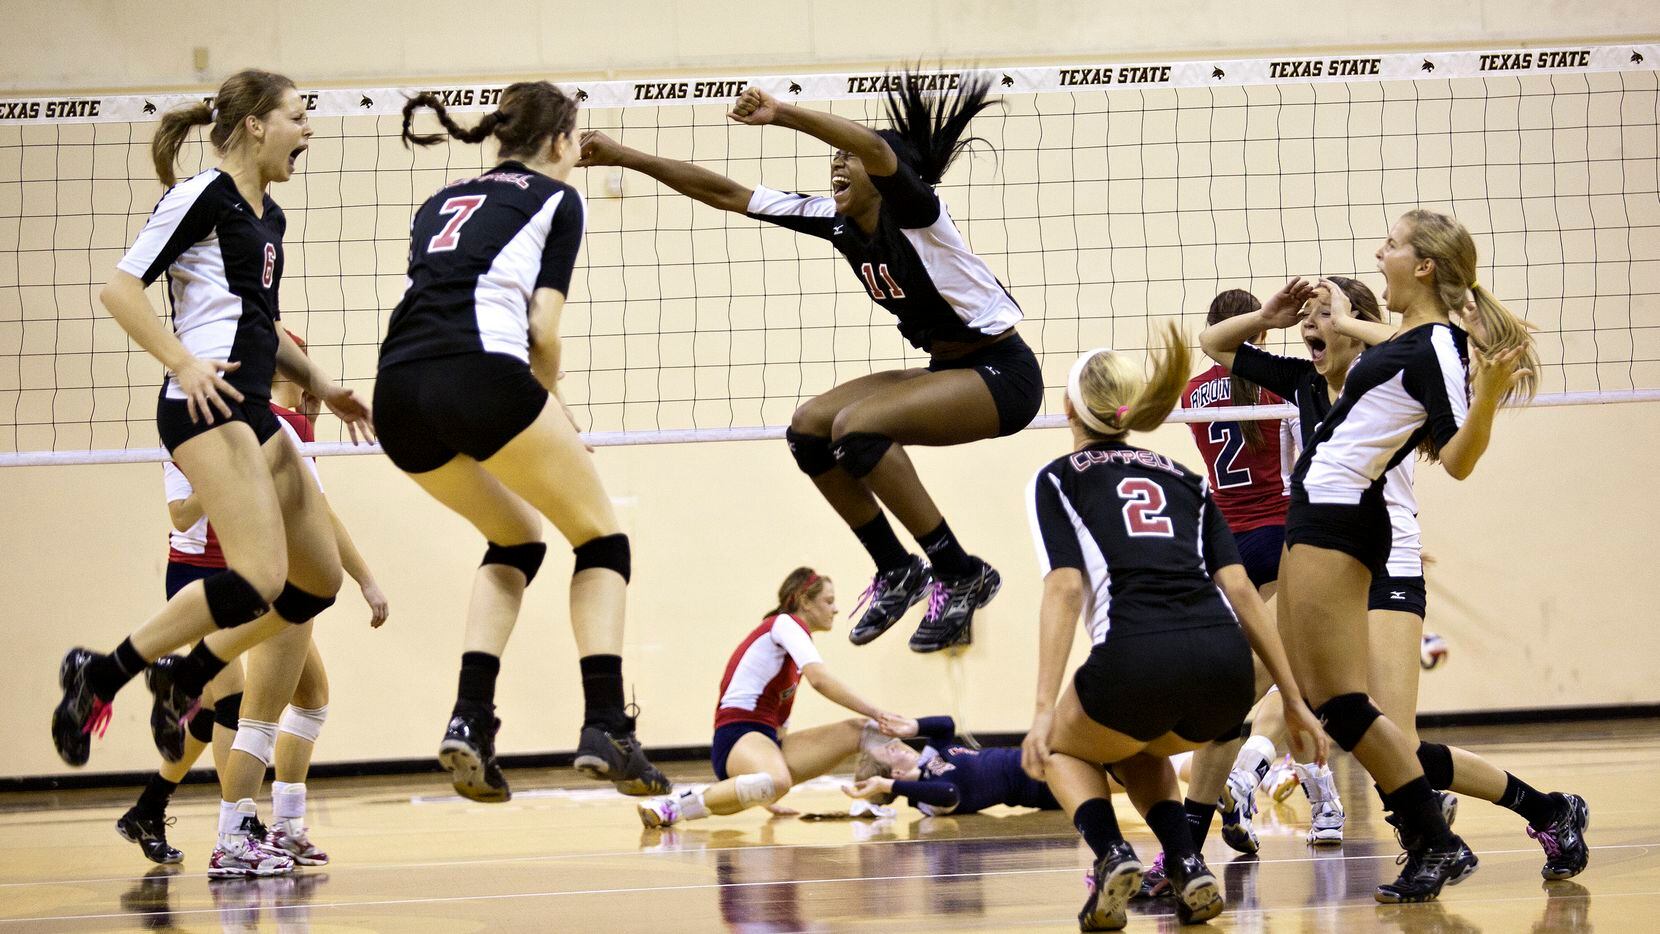 Coppell's depth tilts balance in 5A volleyball title win over McKinney Boyd